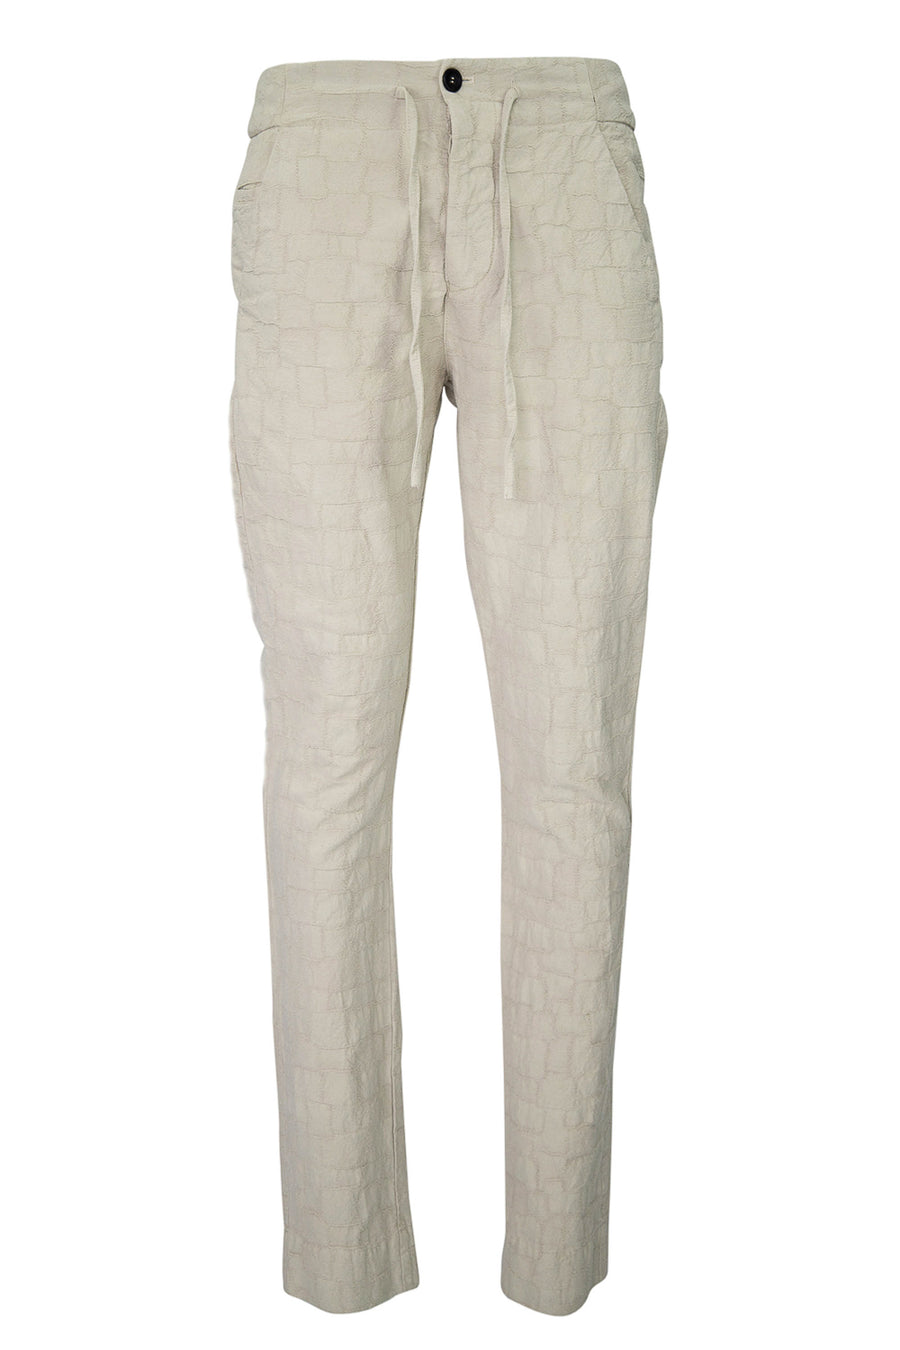 Buy the Hannes Roether Croc-Effect Cotton Trouser in Off White at Intro. Spend £50 for free UK delivery. Official stockists. We ship worldwide.